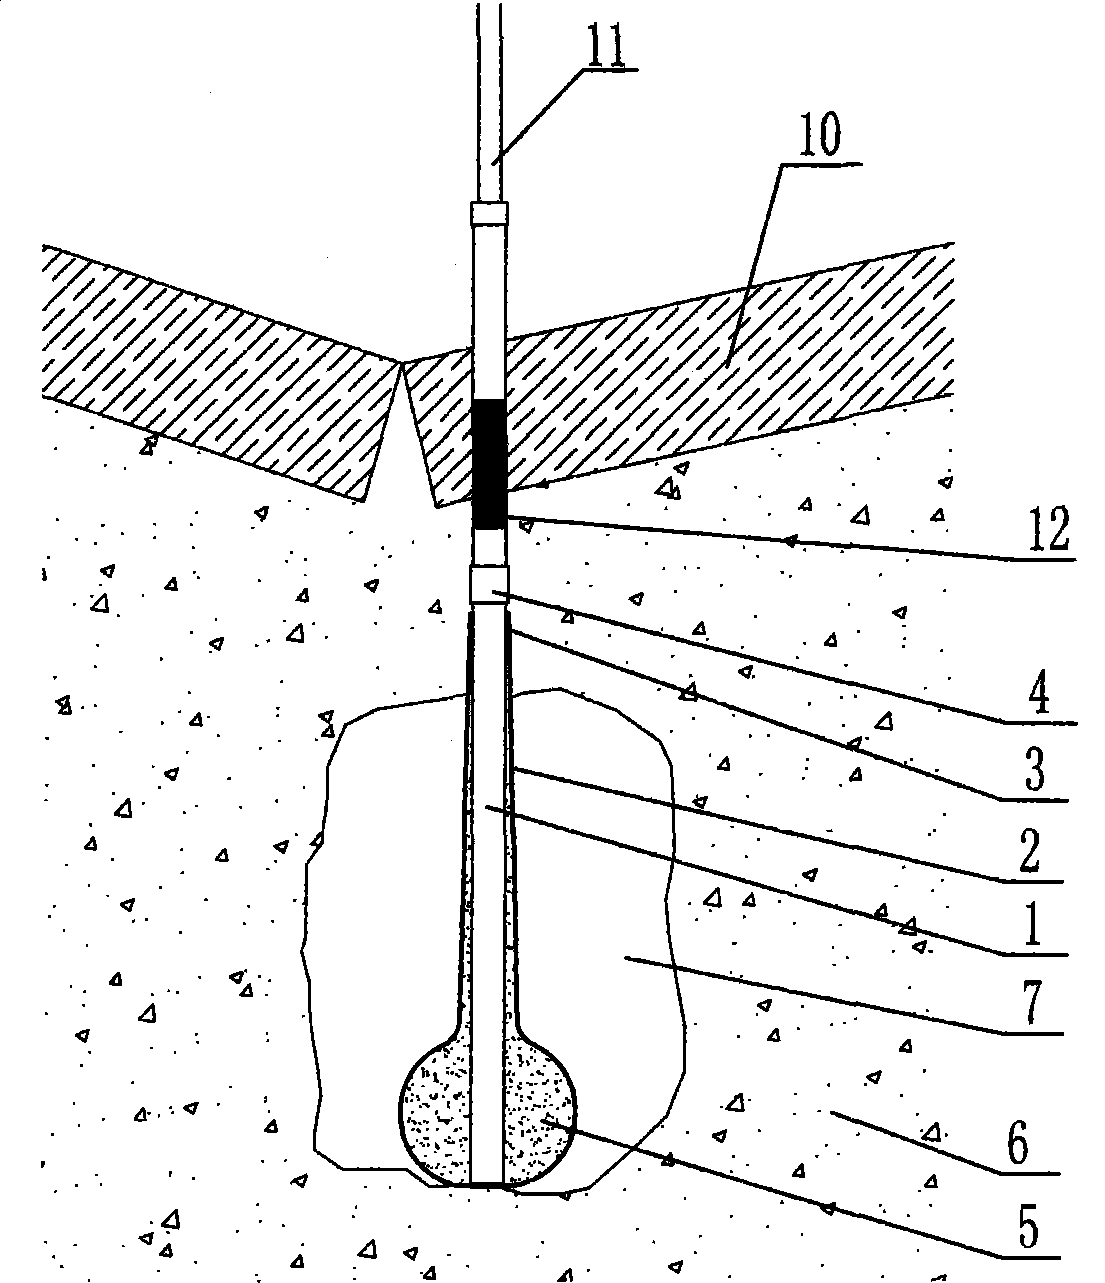 Expansive pouring device and method for governing railway roadbed sedimentation and deformation